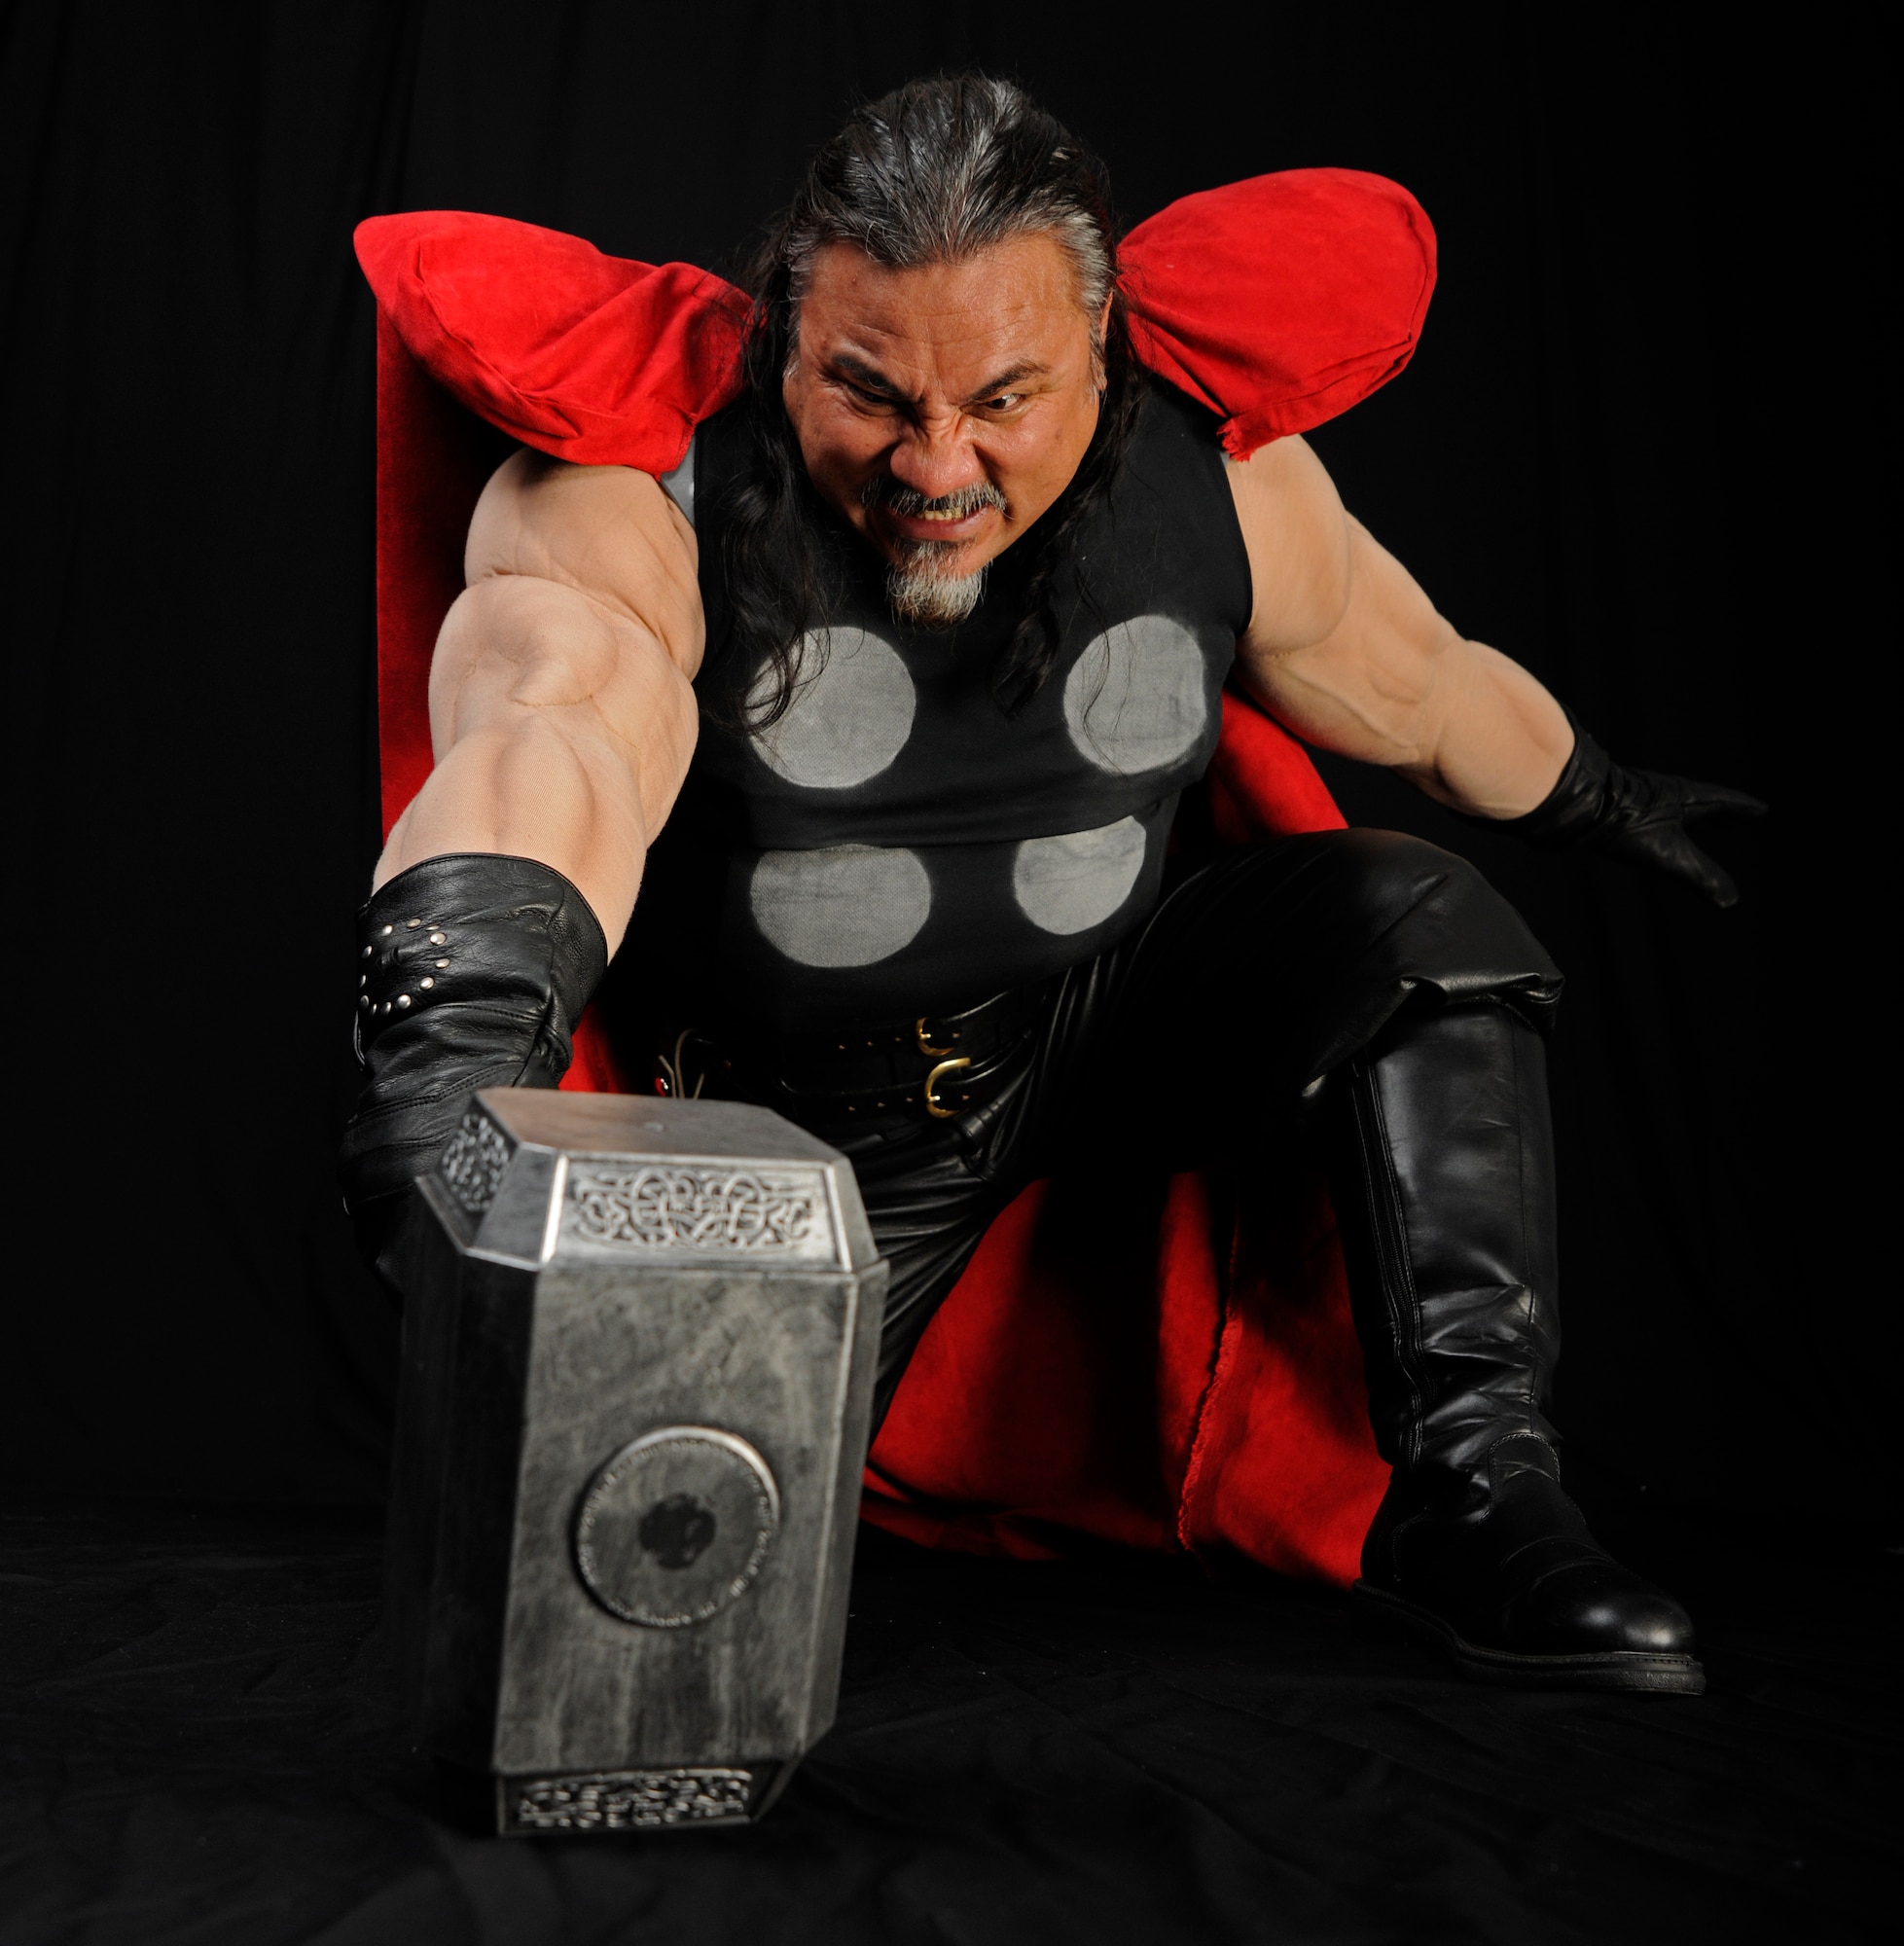 Randy Sena strikes a “blow for justice” in a Thor costume he made himself. An avid cosplayer, Sena has won several awards for his designs. Sena is the 11th Wing chief of exercises at Joint Base Andrews, Md. (U.S. Air Force photo/Staff Sgt. Torey Griffith)